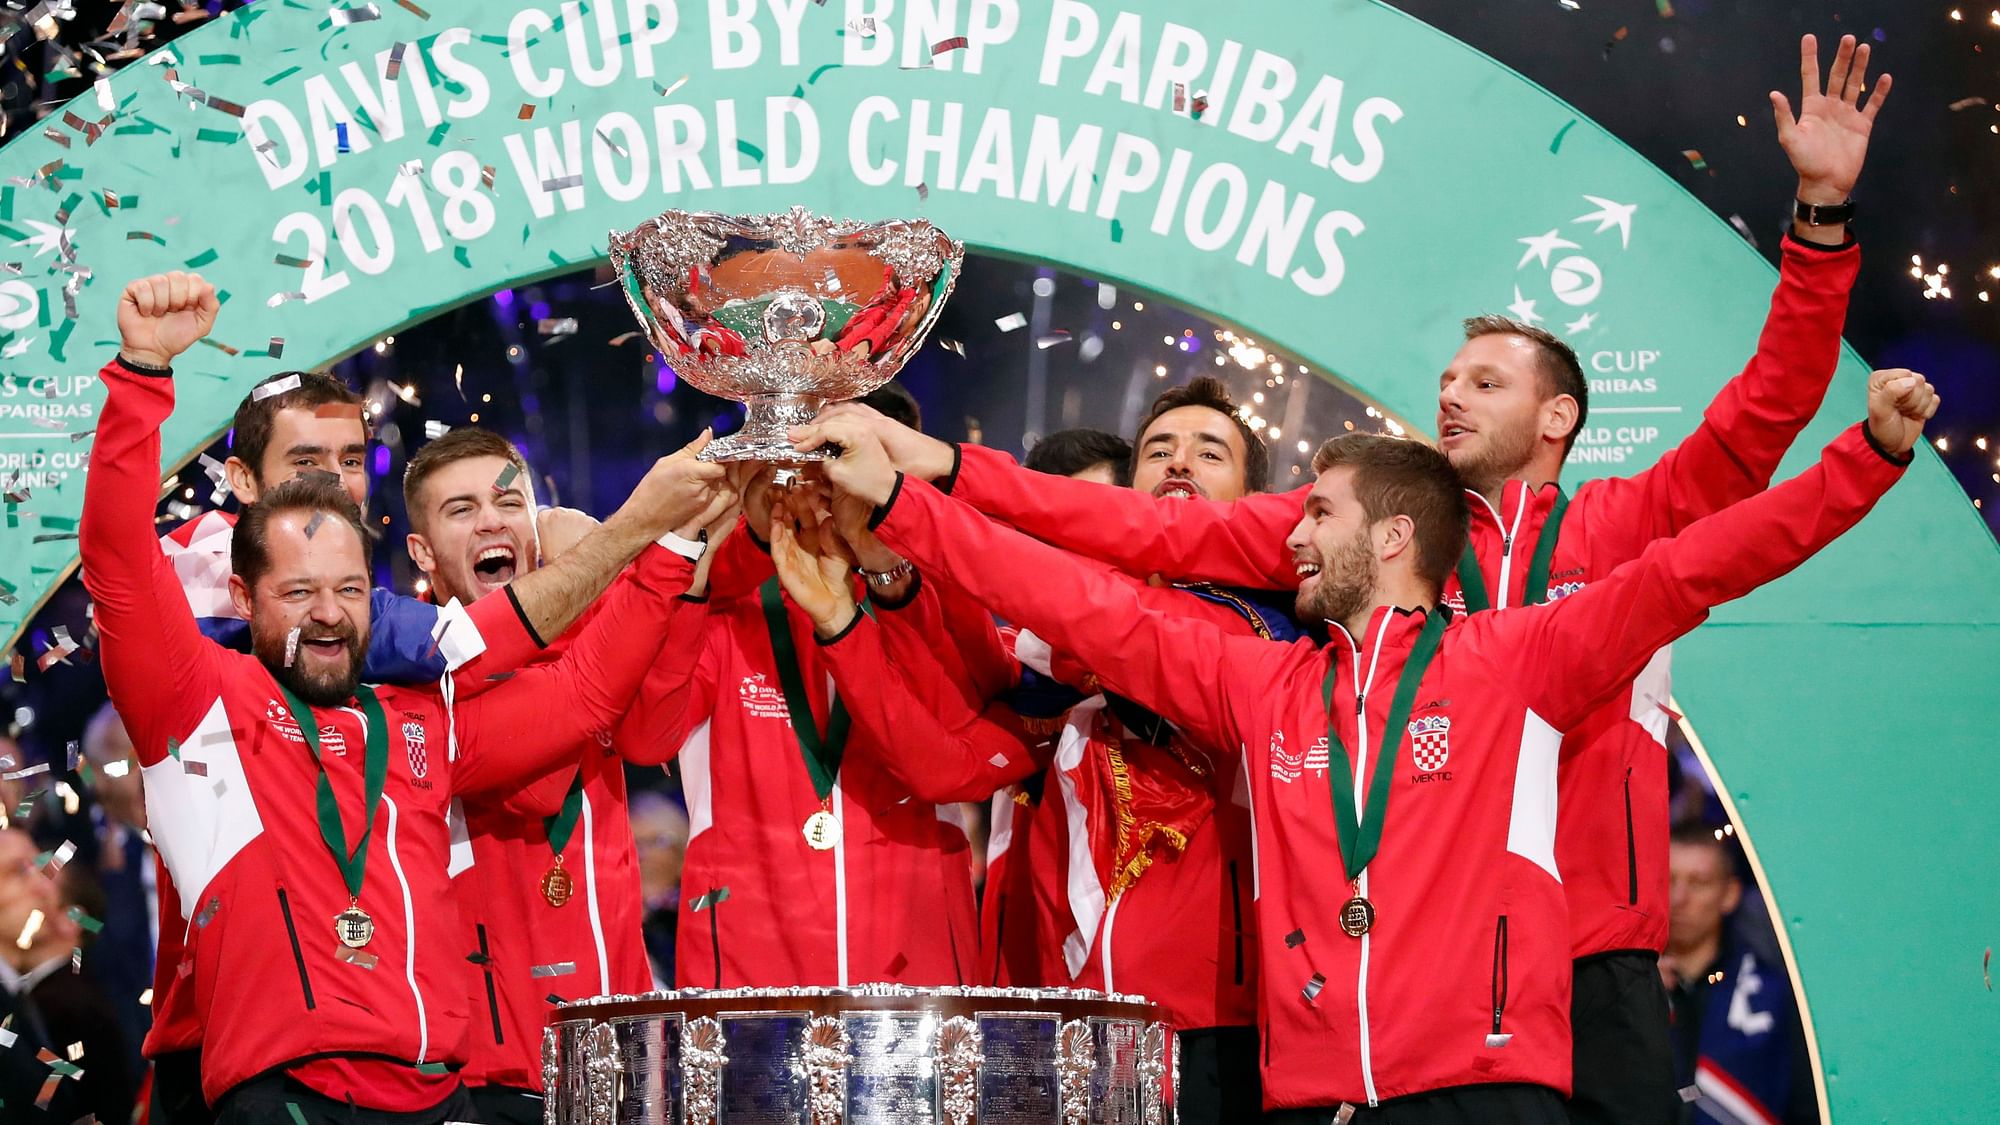 Croatia’s team captain Zeljko Krajan (left) and players lift up the cup after the team won the Davis Cup final between France and Croatia on Sunday, November 25, 2018 in Lille in France.